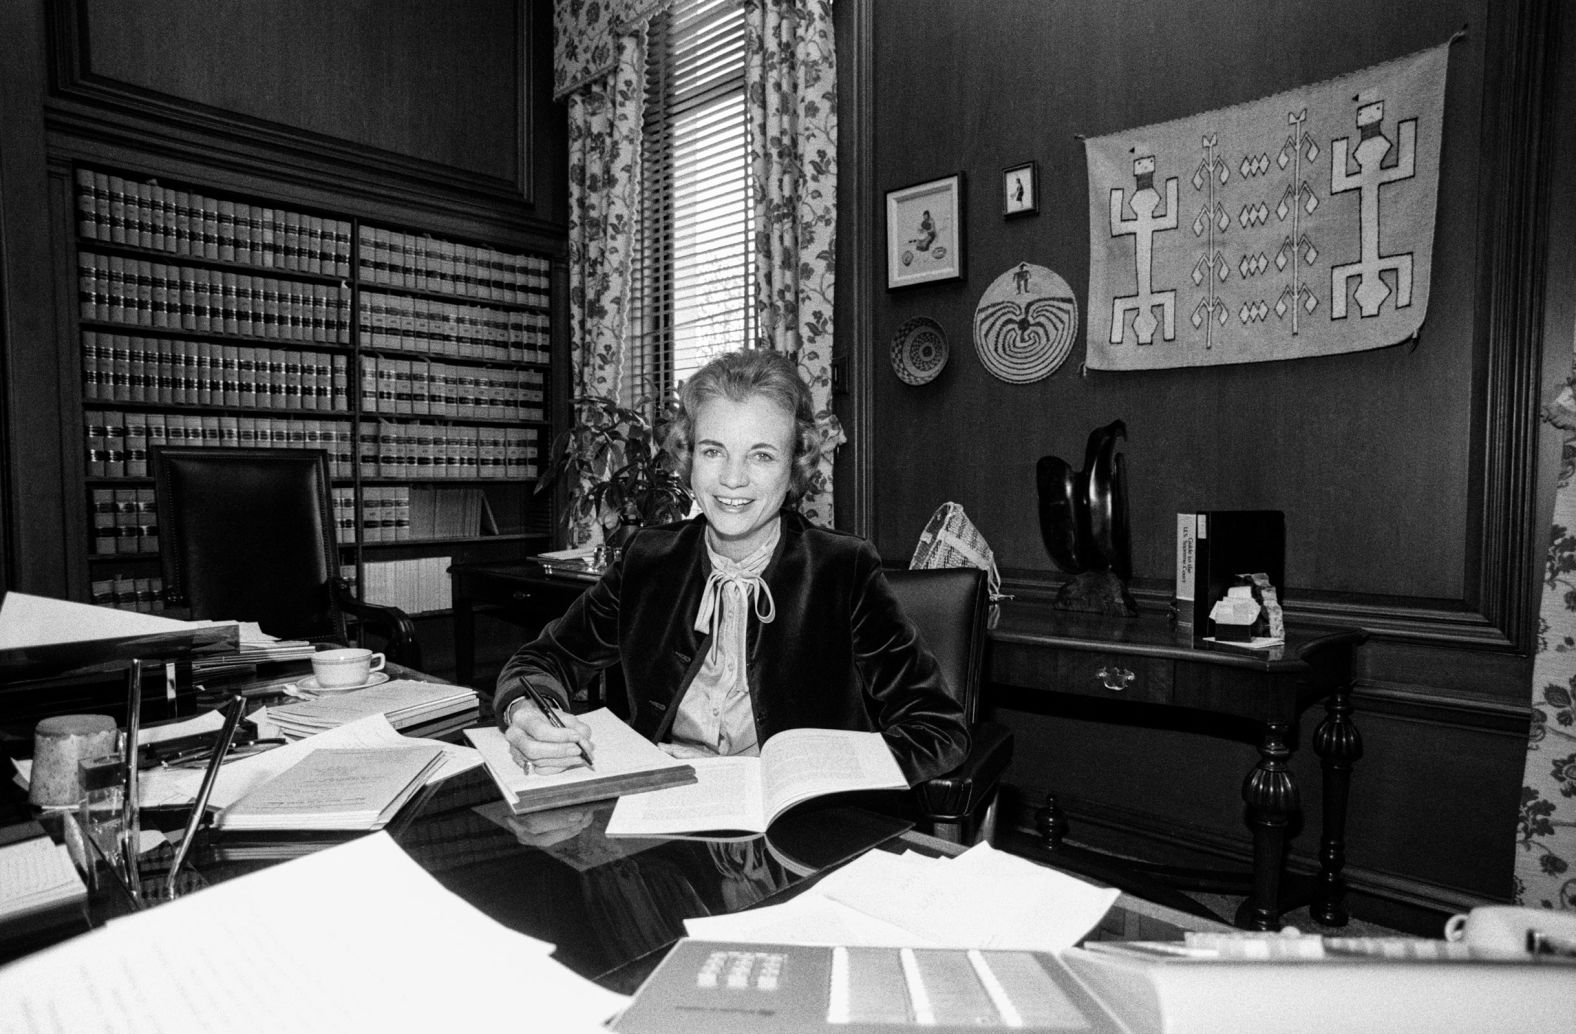 O'Connor is seen in her chambers 10 days after she was sworn in.